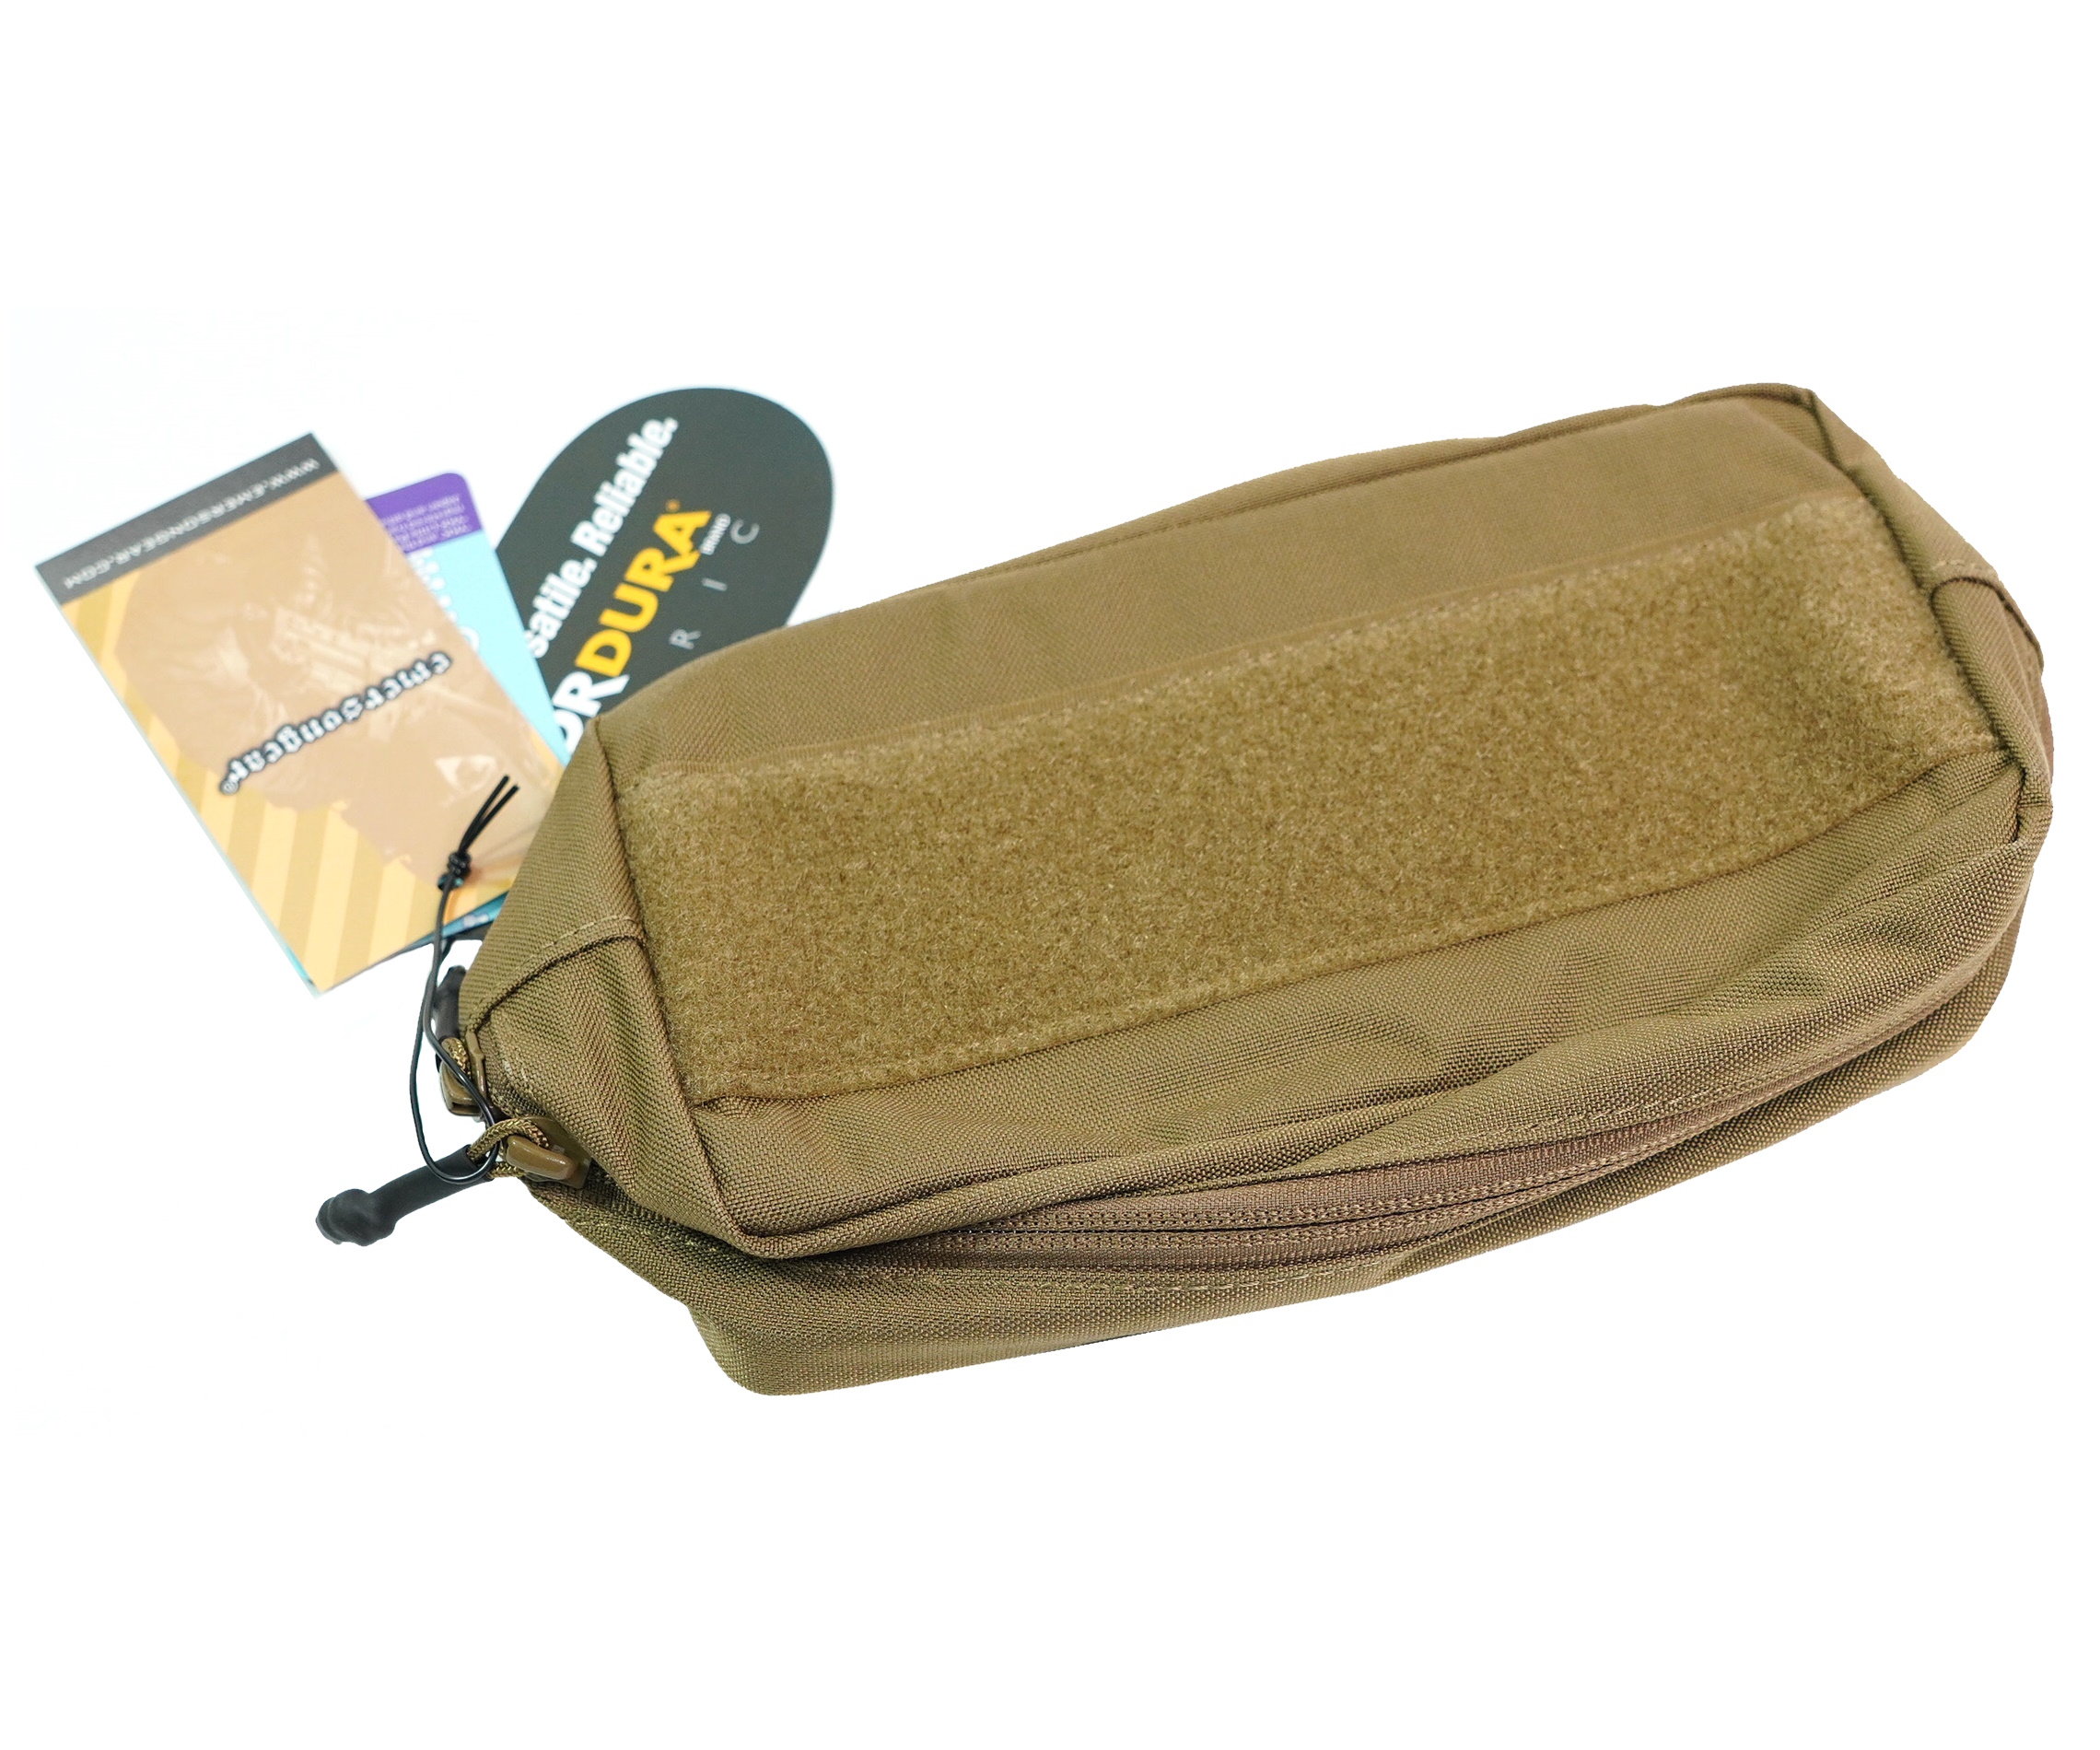 EmersonGear Tactical Action Pouch /CB